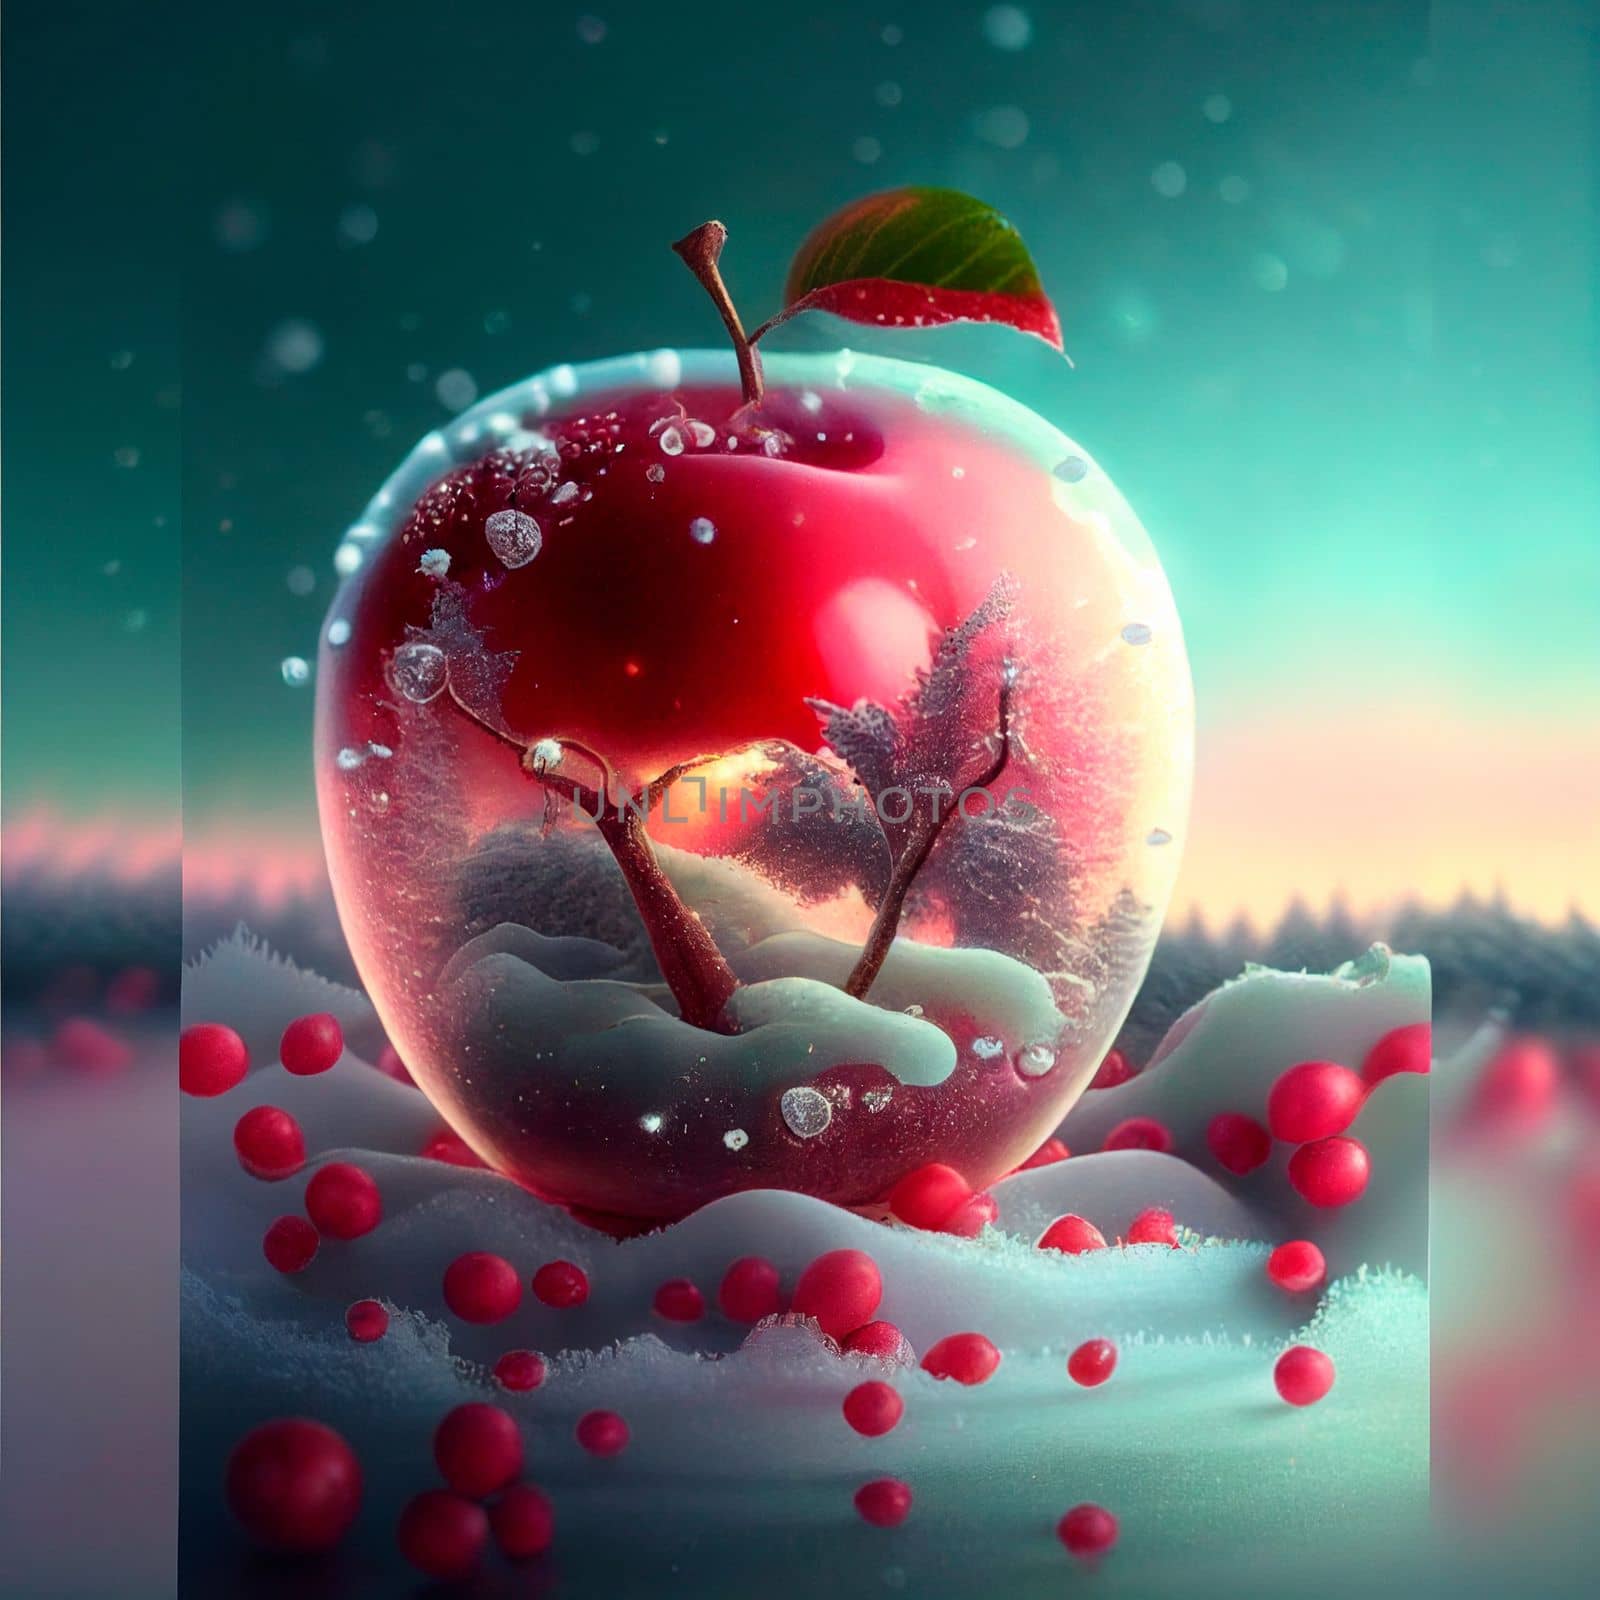 Illustration of a frosty red apple with various inlays inside it. High quality illustration